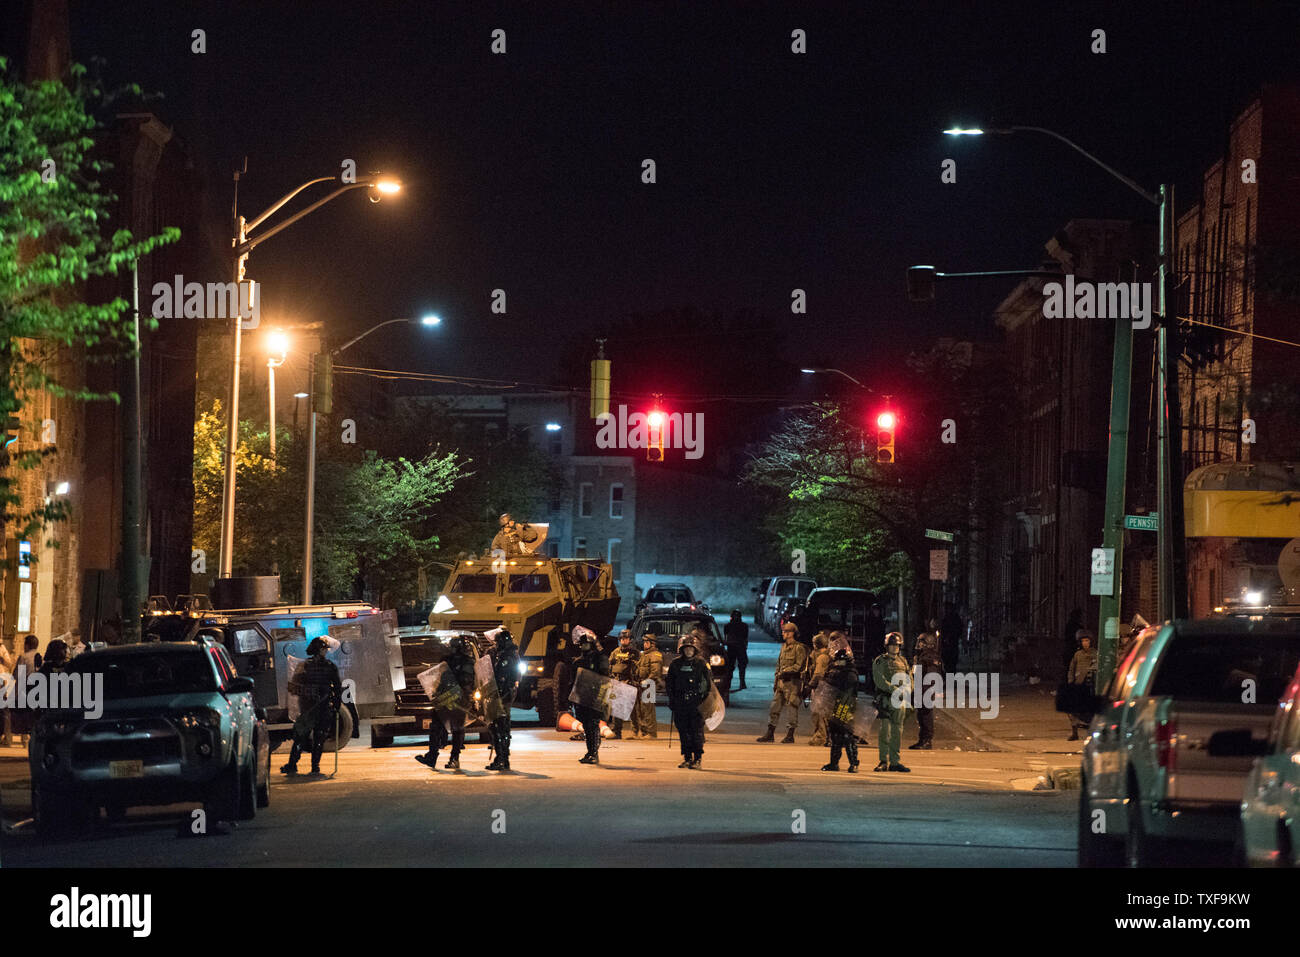 Police in riot gear line up with military rescue vehicle while local citizens pushed the limit of the 10 p.m. curfew in Baltimore, Maryland on April 28, 2015.  Protests have erupted after death of Freddie Gray.    Photo by Ken Cedeno/UPI Stock Photo